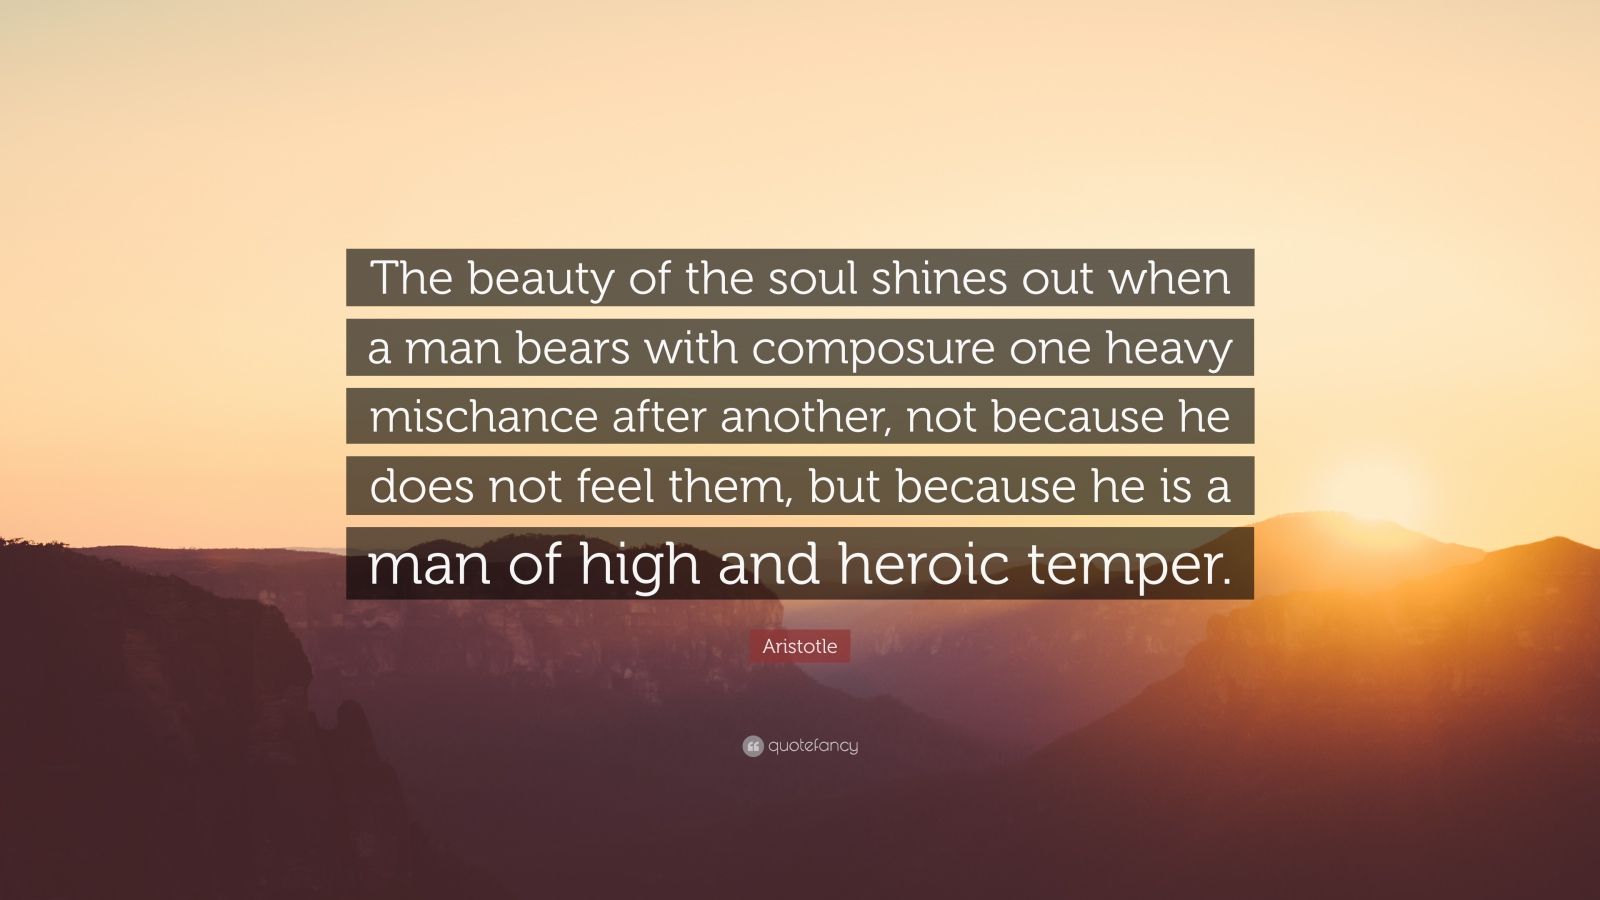 Aristotle Quote: “The beauty of the soul shines out when a man bears ...